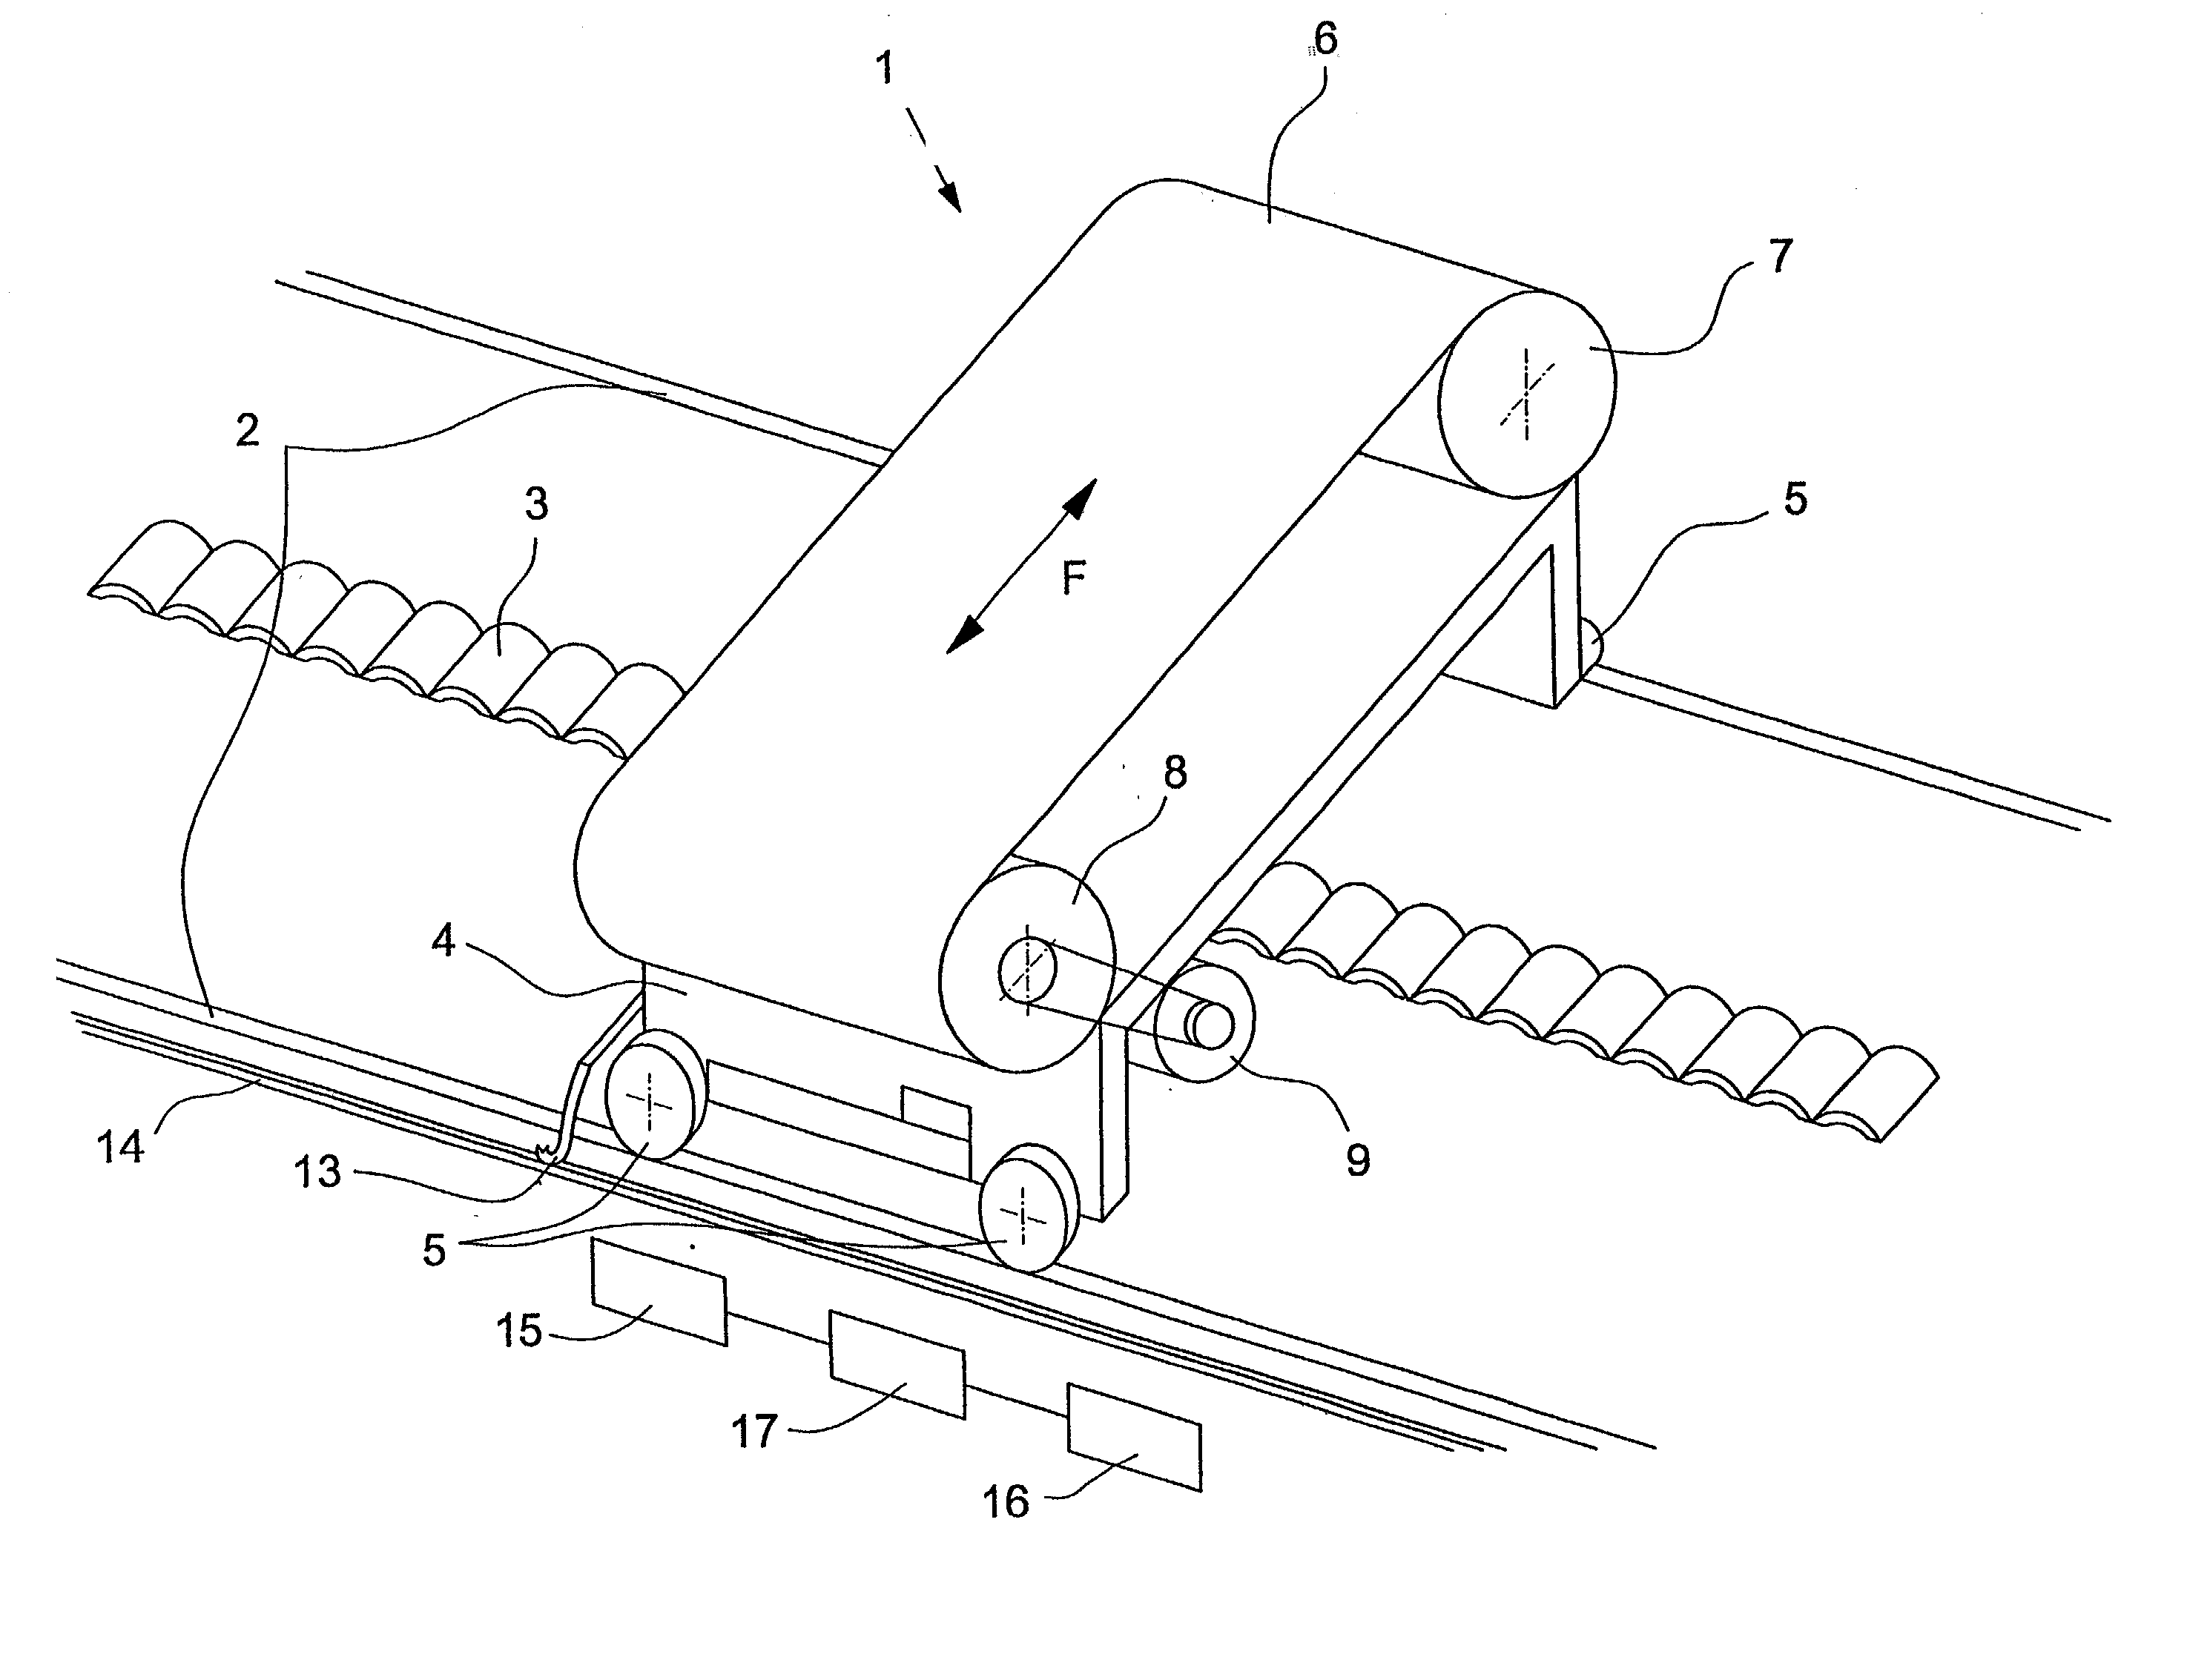 Equipment and method for activating and controlling sorting units in a sorting machine